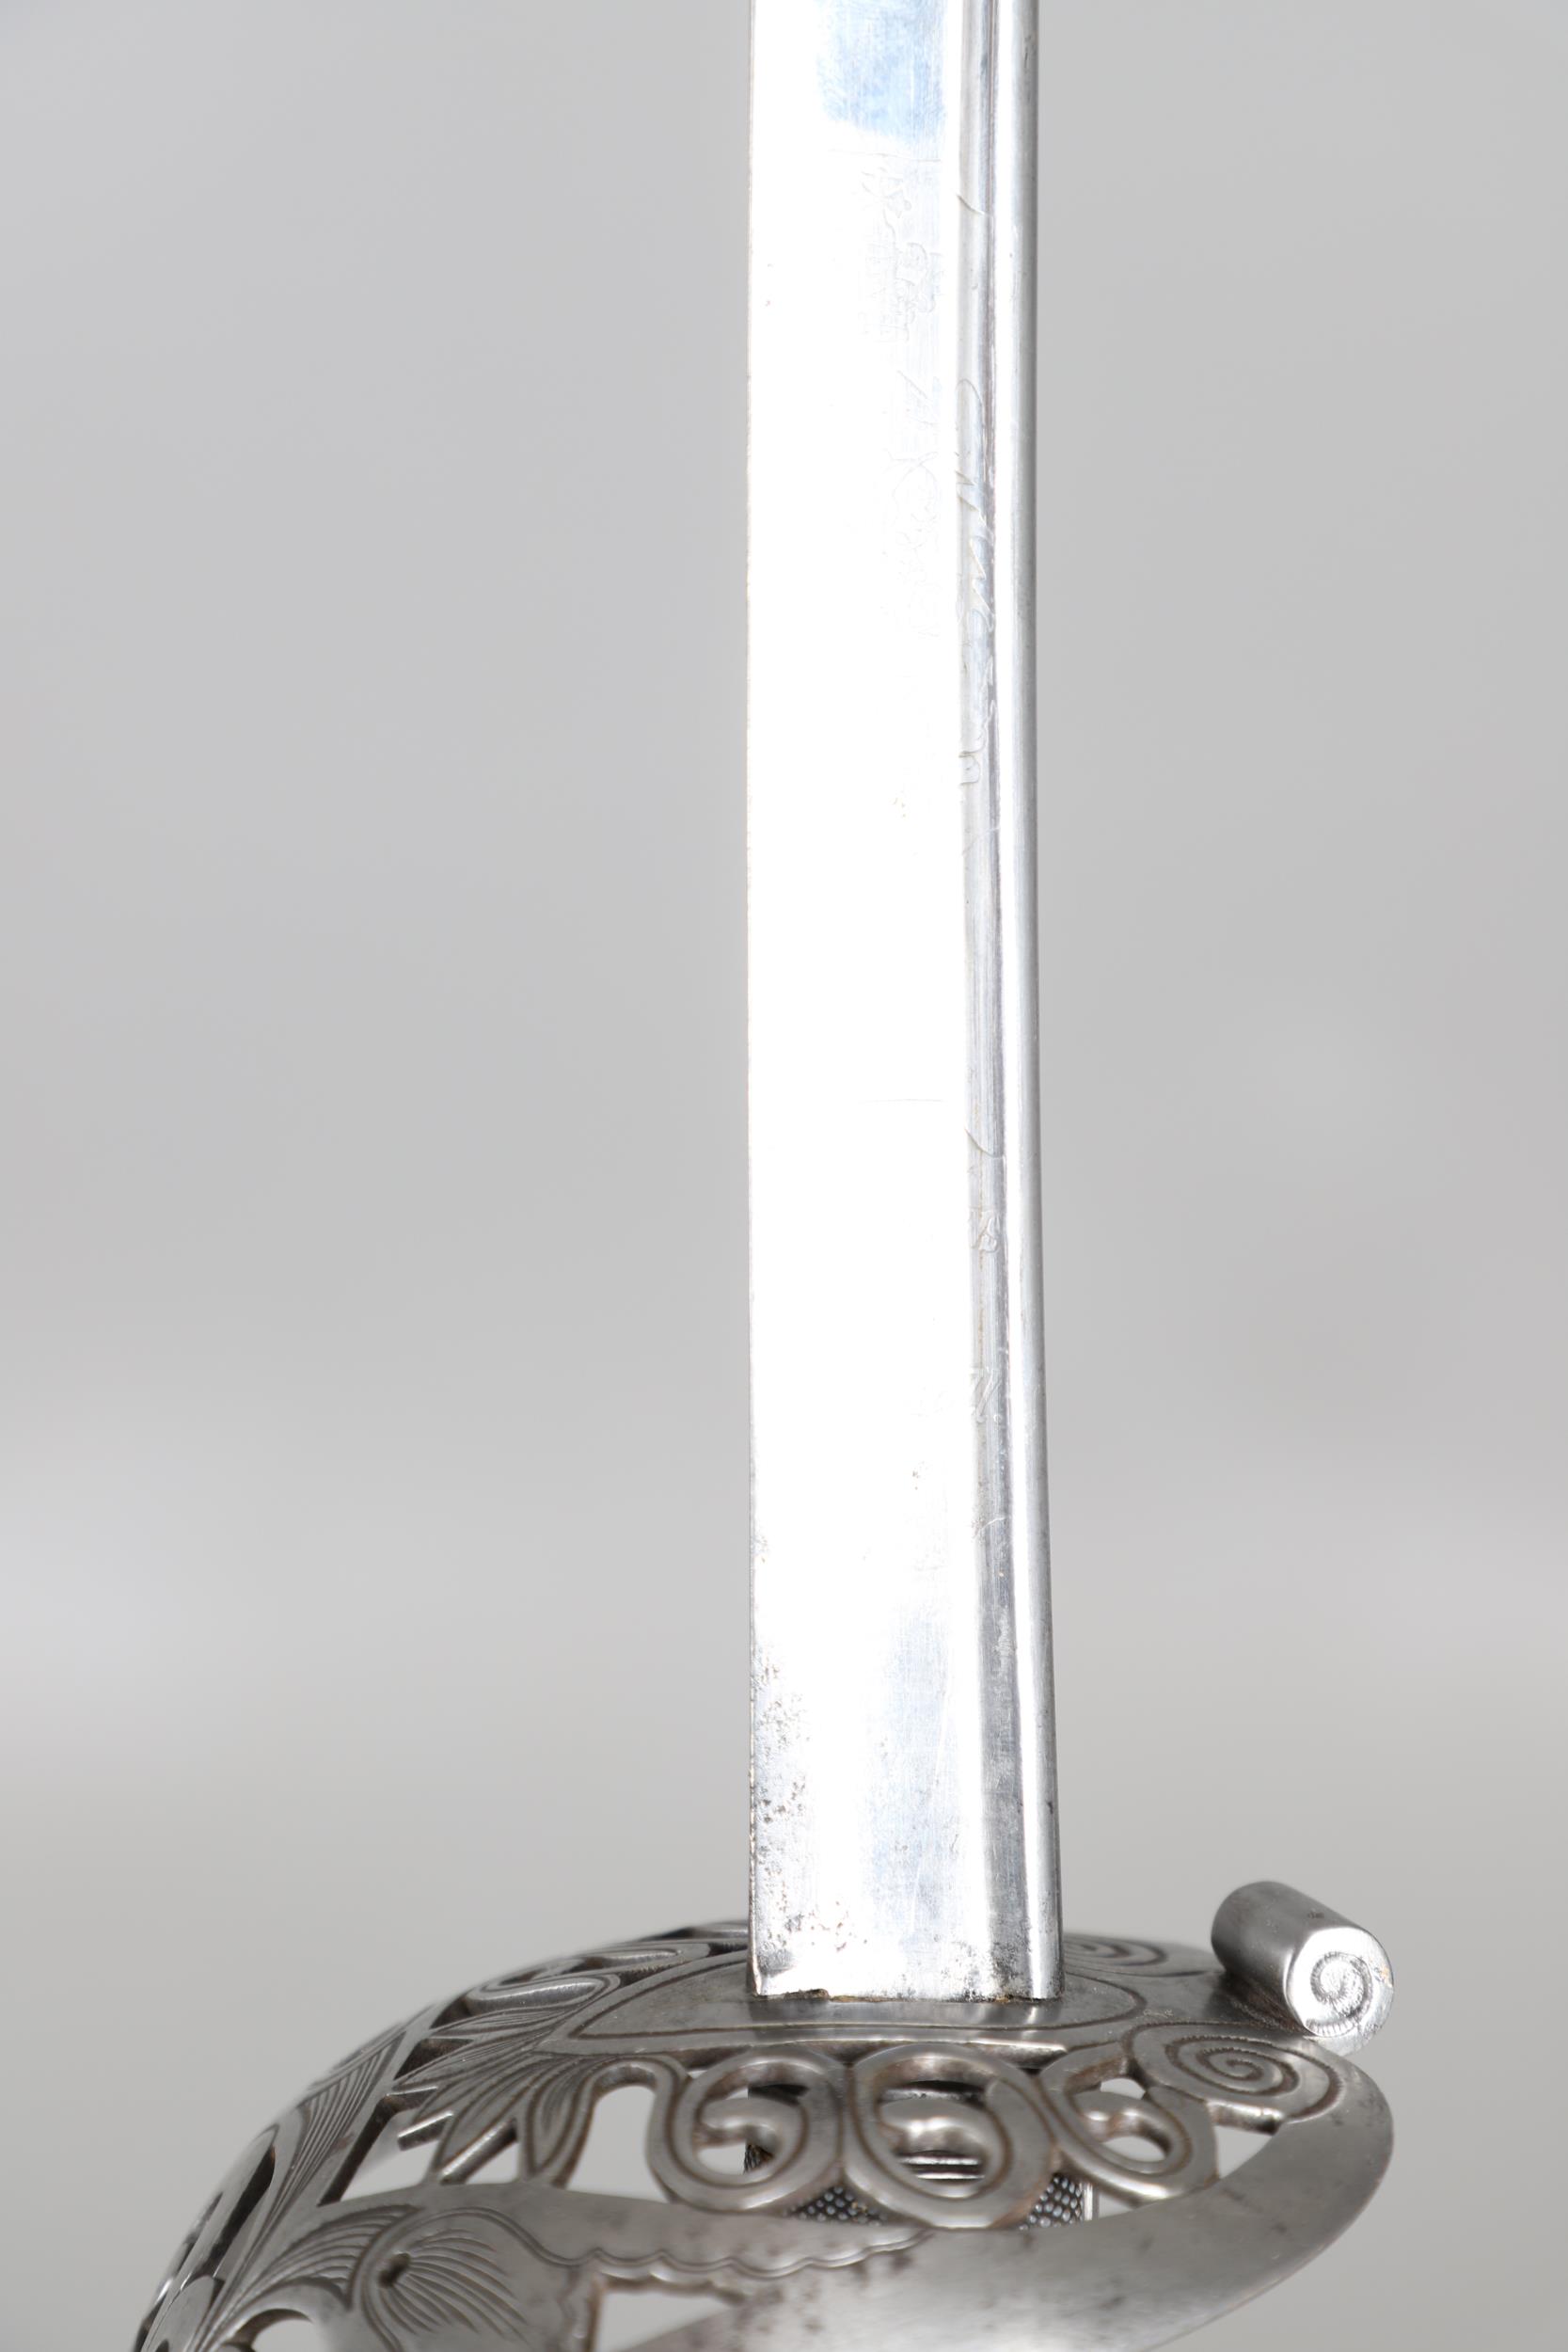 A GEORGE IV 1822 PATTERN HEAVY CAVALRY PATTERN SWORD BY ANDREWS OF PALL MALL. - Image 7 of 12